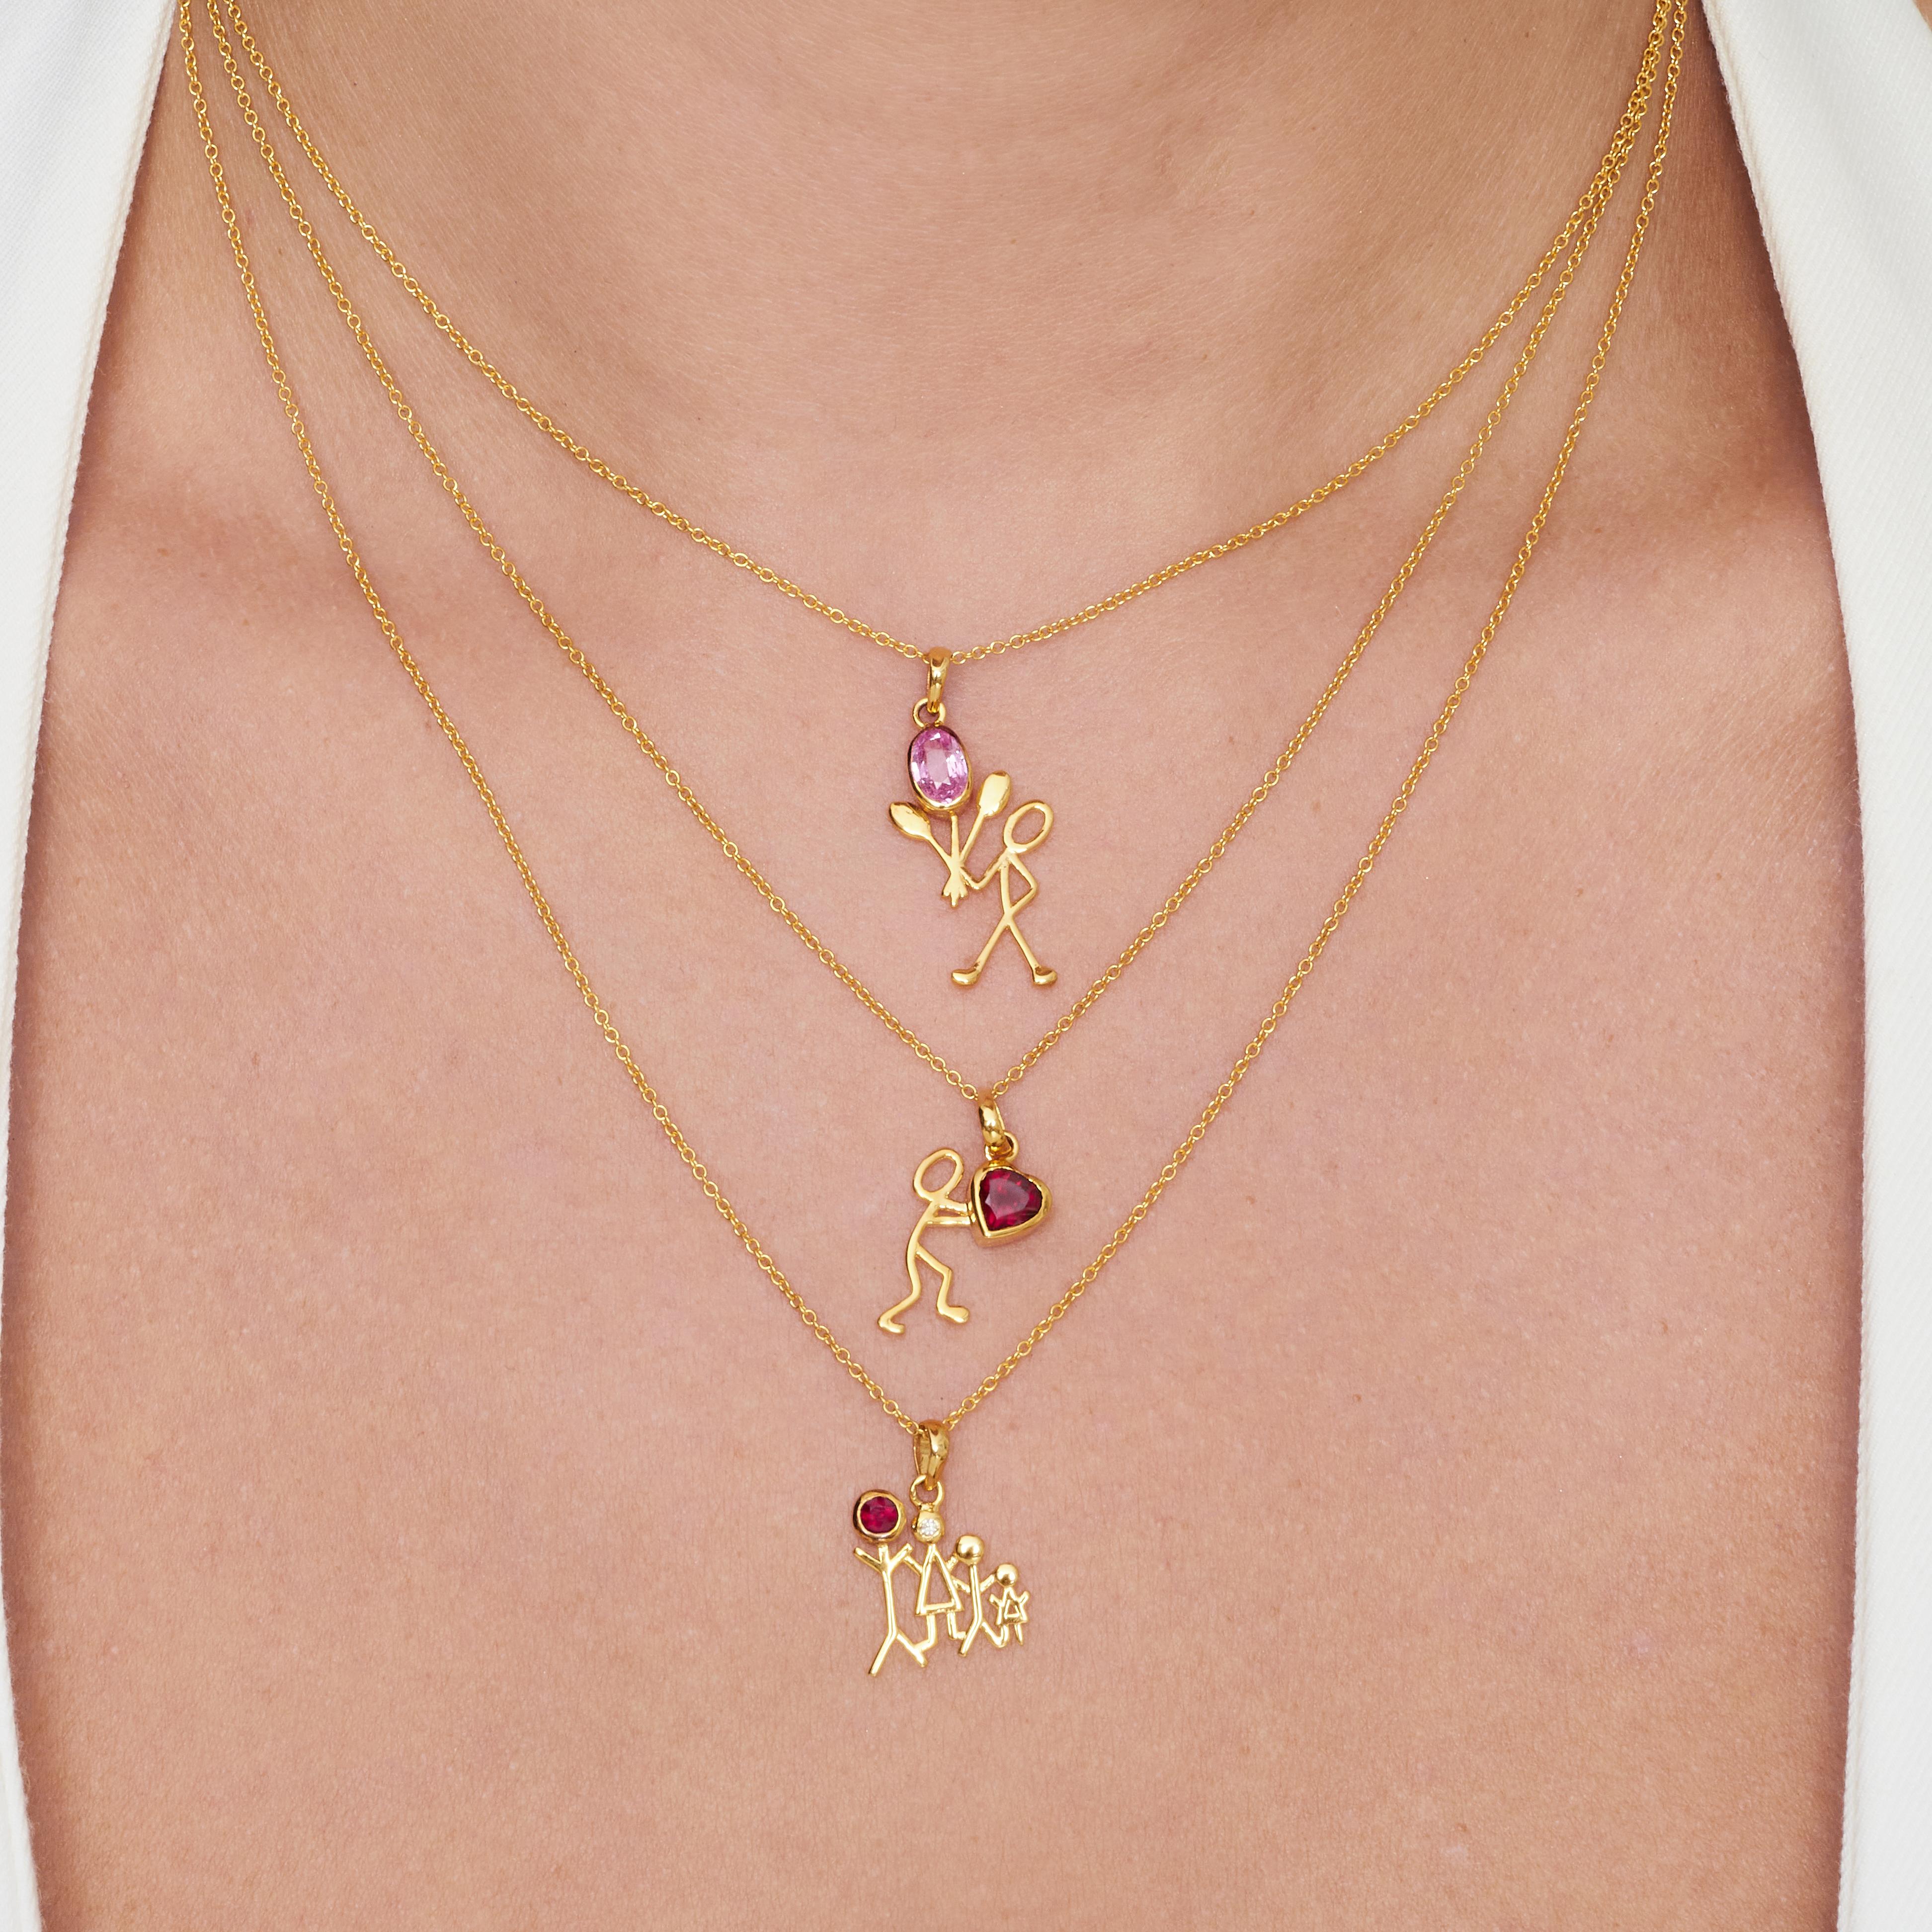 0.50 Carat Pink Sapphire Yellow Gold Stick Figure with Balloons Pendant Necklace.

This pendant necklace was handmade with 18-karat yellow gold. It features a 0.50-carat pink sapphire. This pendant is on an 18-inch chain necklace with a lobster